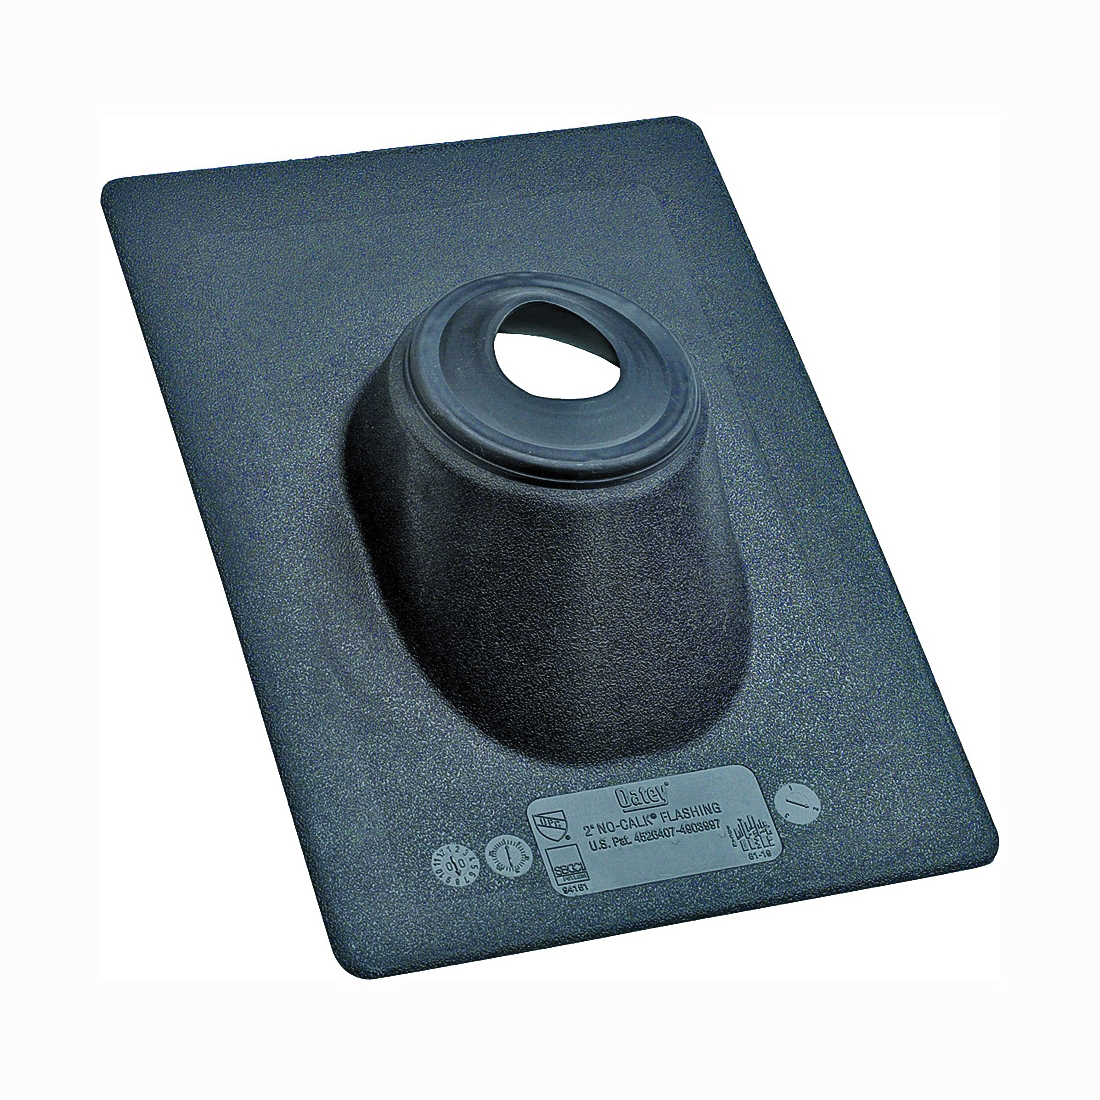 Hercules No-Calk Series 11899 Roof Flashing, 13 in OAL, 9-1/4 in OAW, Thermoplastic - 1